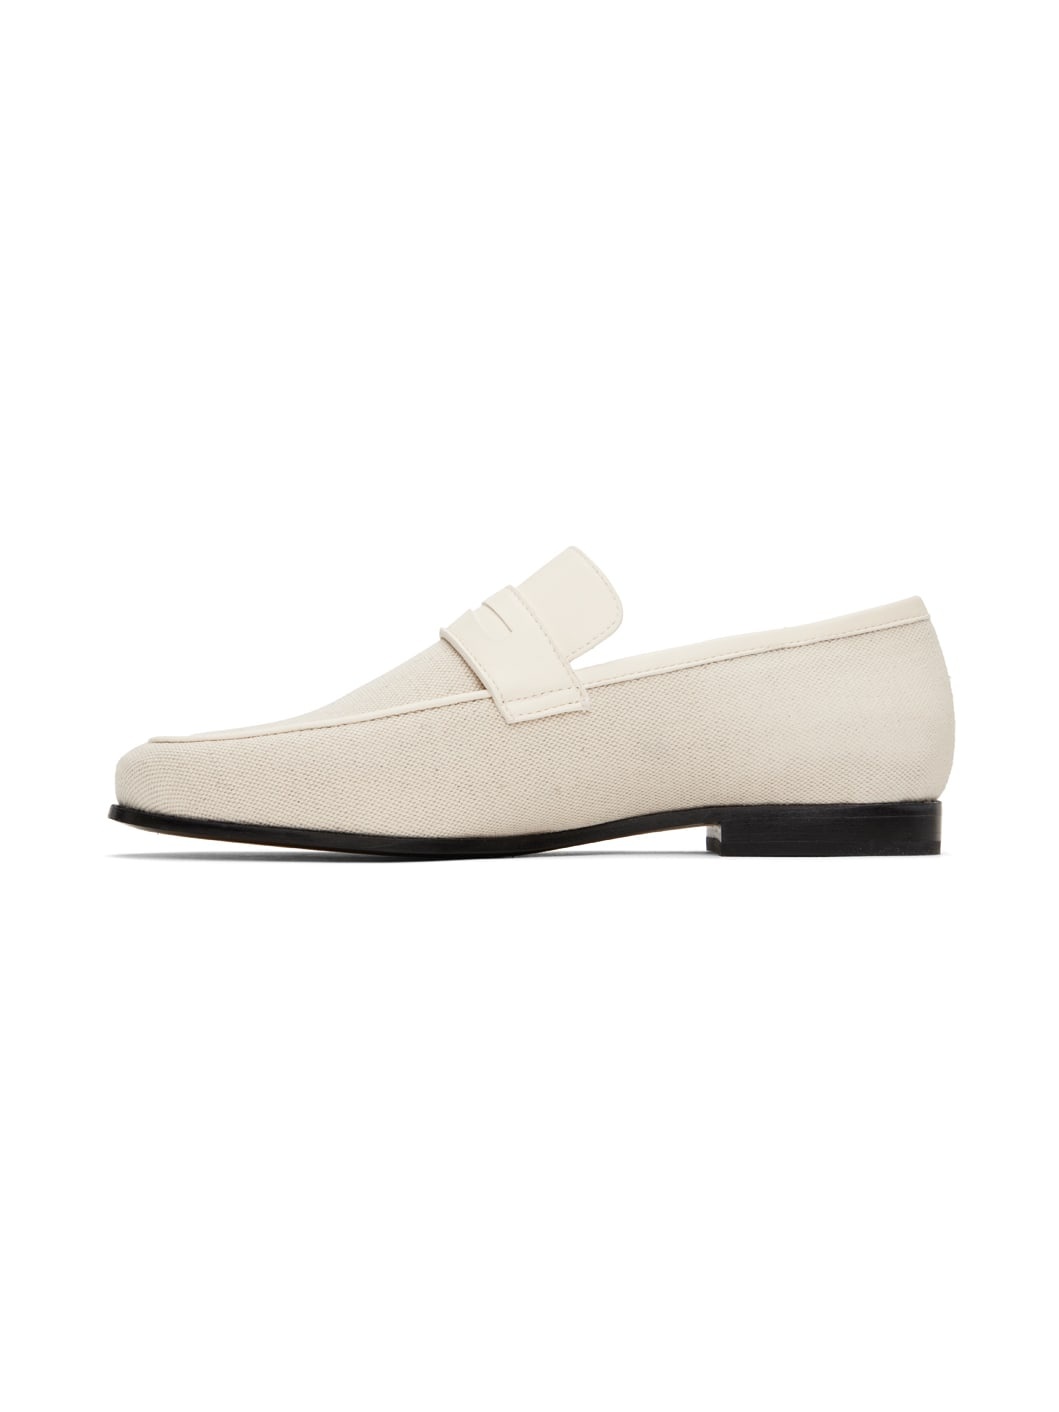 Off-White 'The Canvas' Penny Loafers - 3